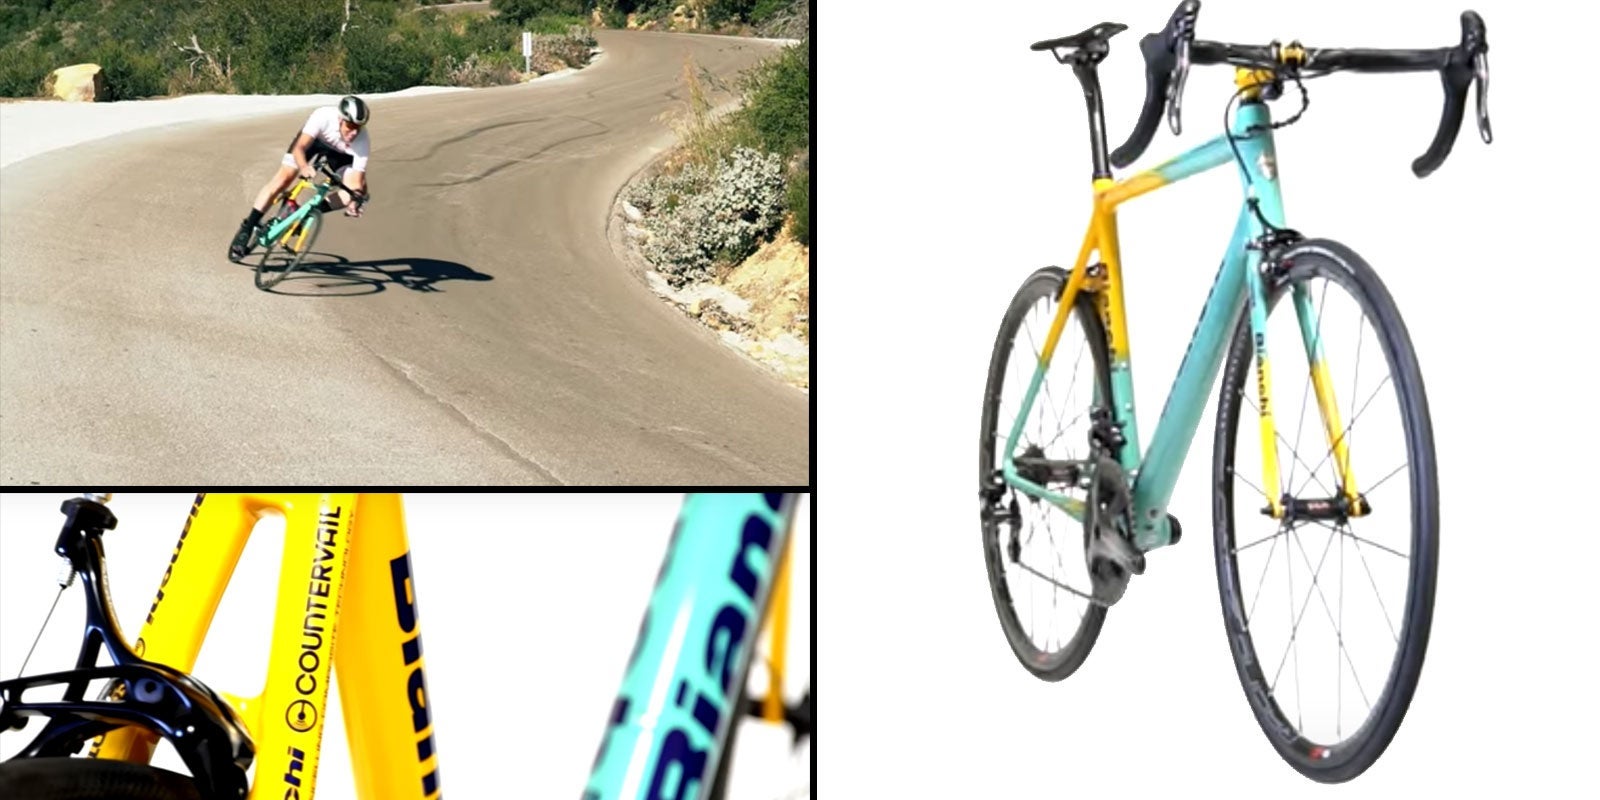 Testriding the 20th Anniversary Pantani Bianchi Specialissima - Velo